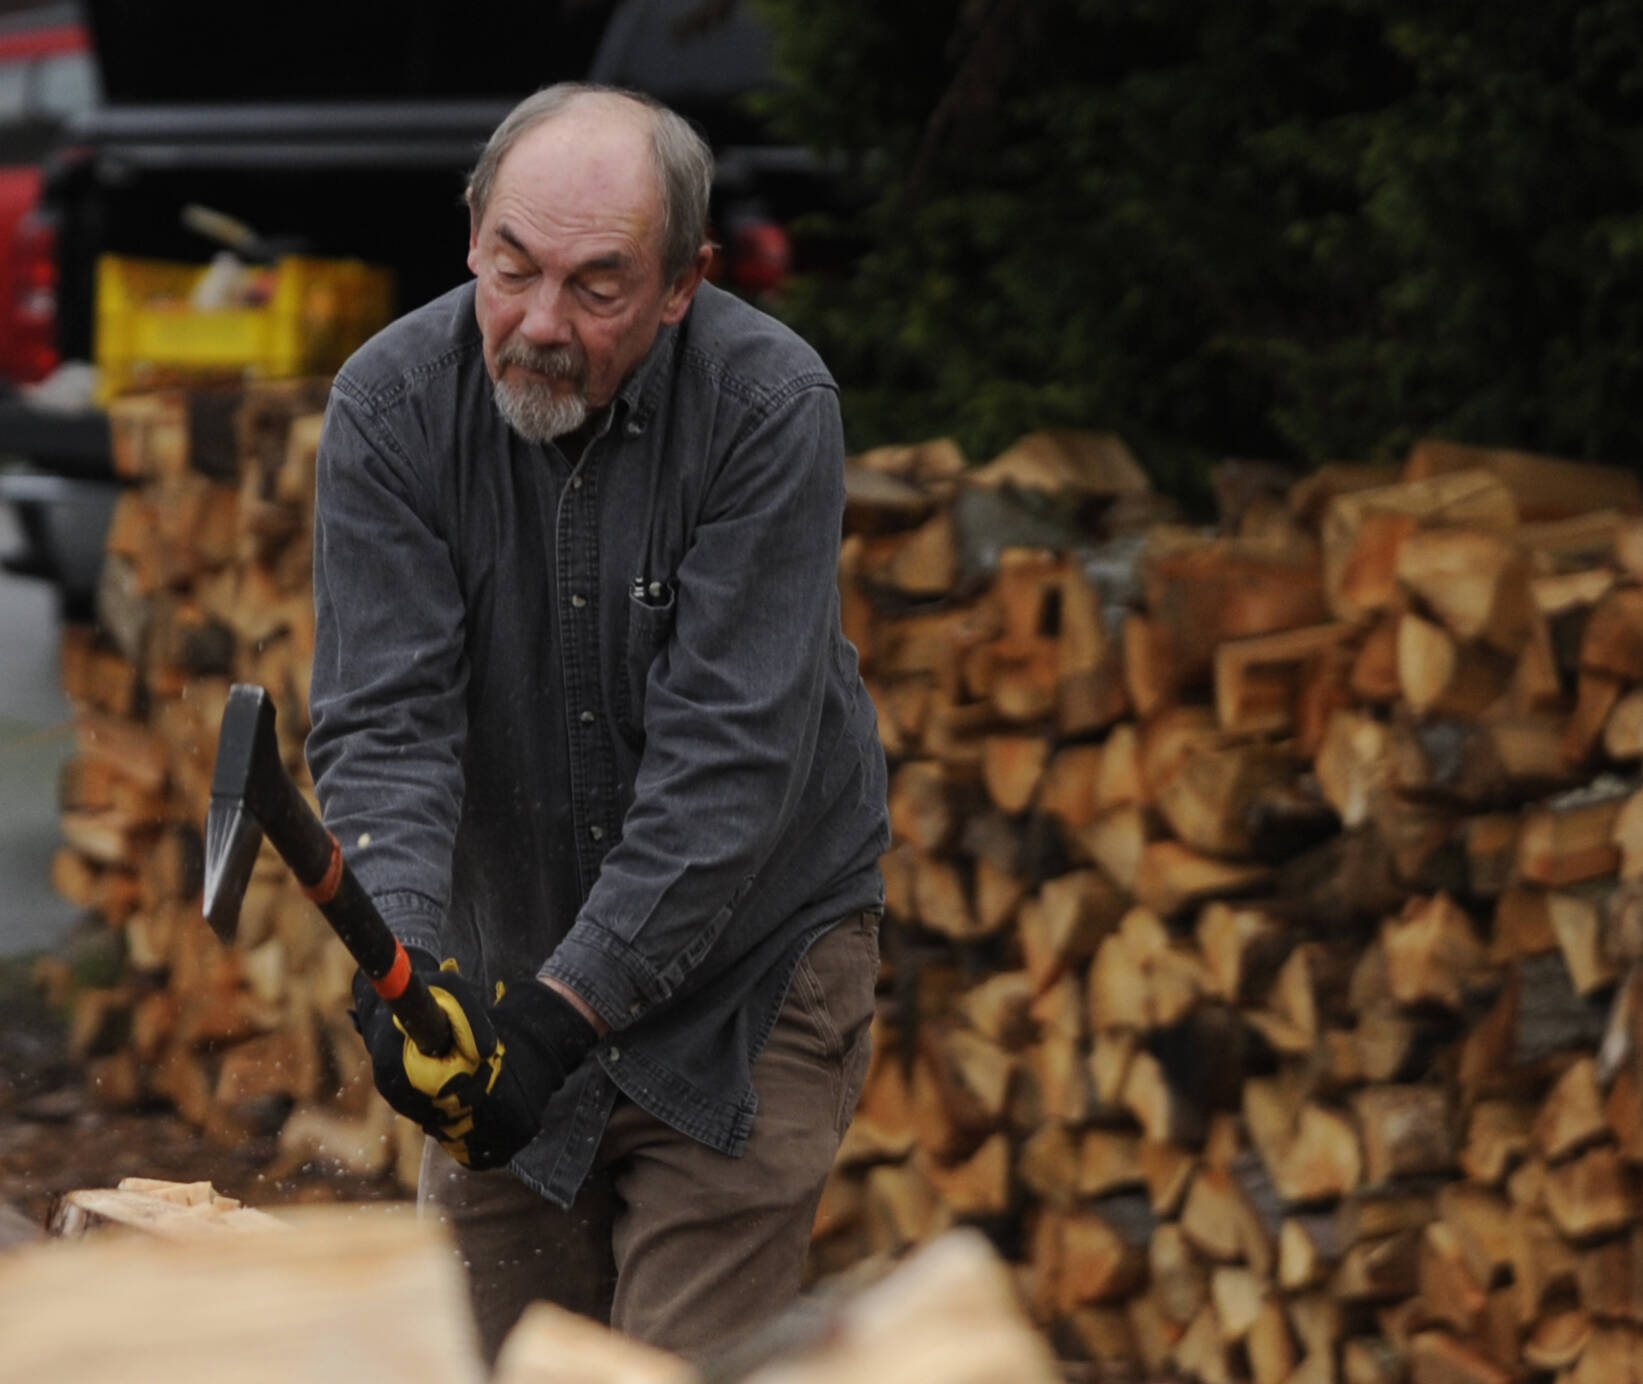 Ron Long lines up his axe as he and fellow woodcutters split wood at Jack Tatom’s property last month. (Michael Dashiell/Olympic Peninsula News Group)